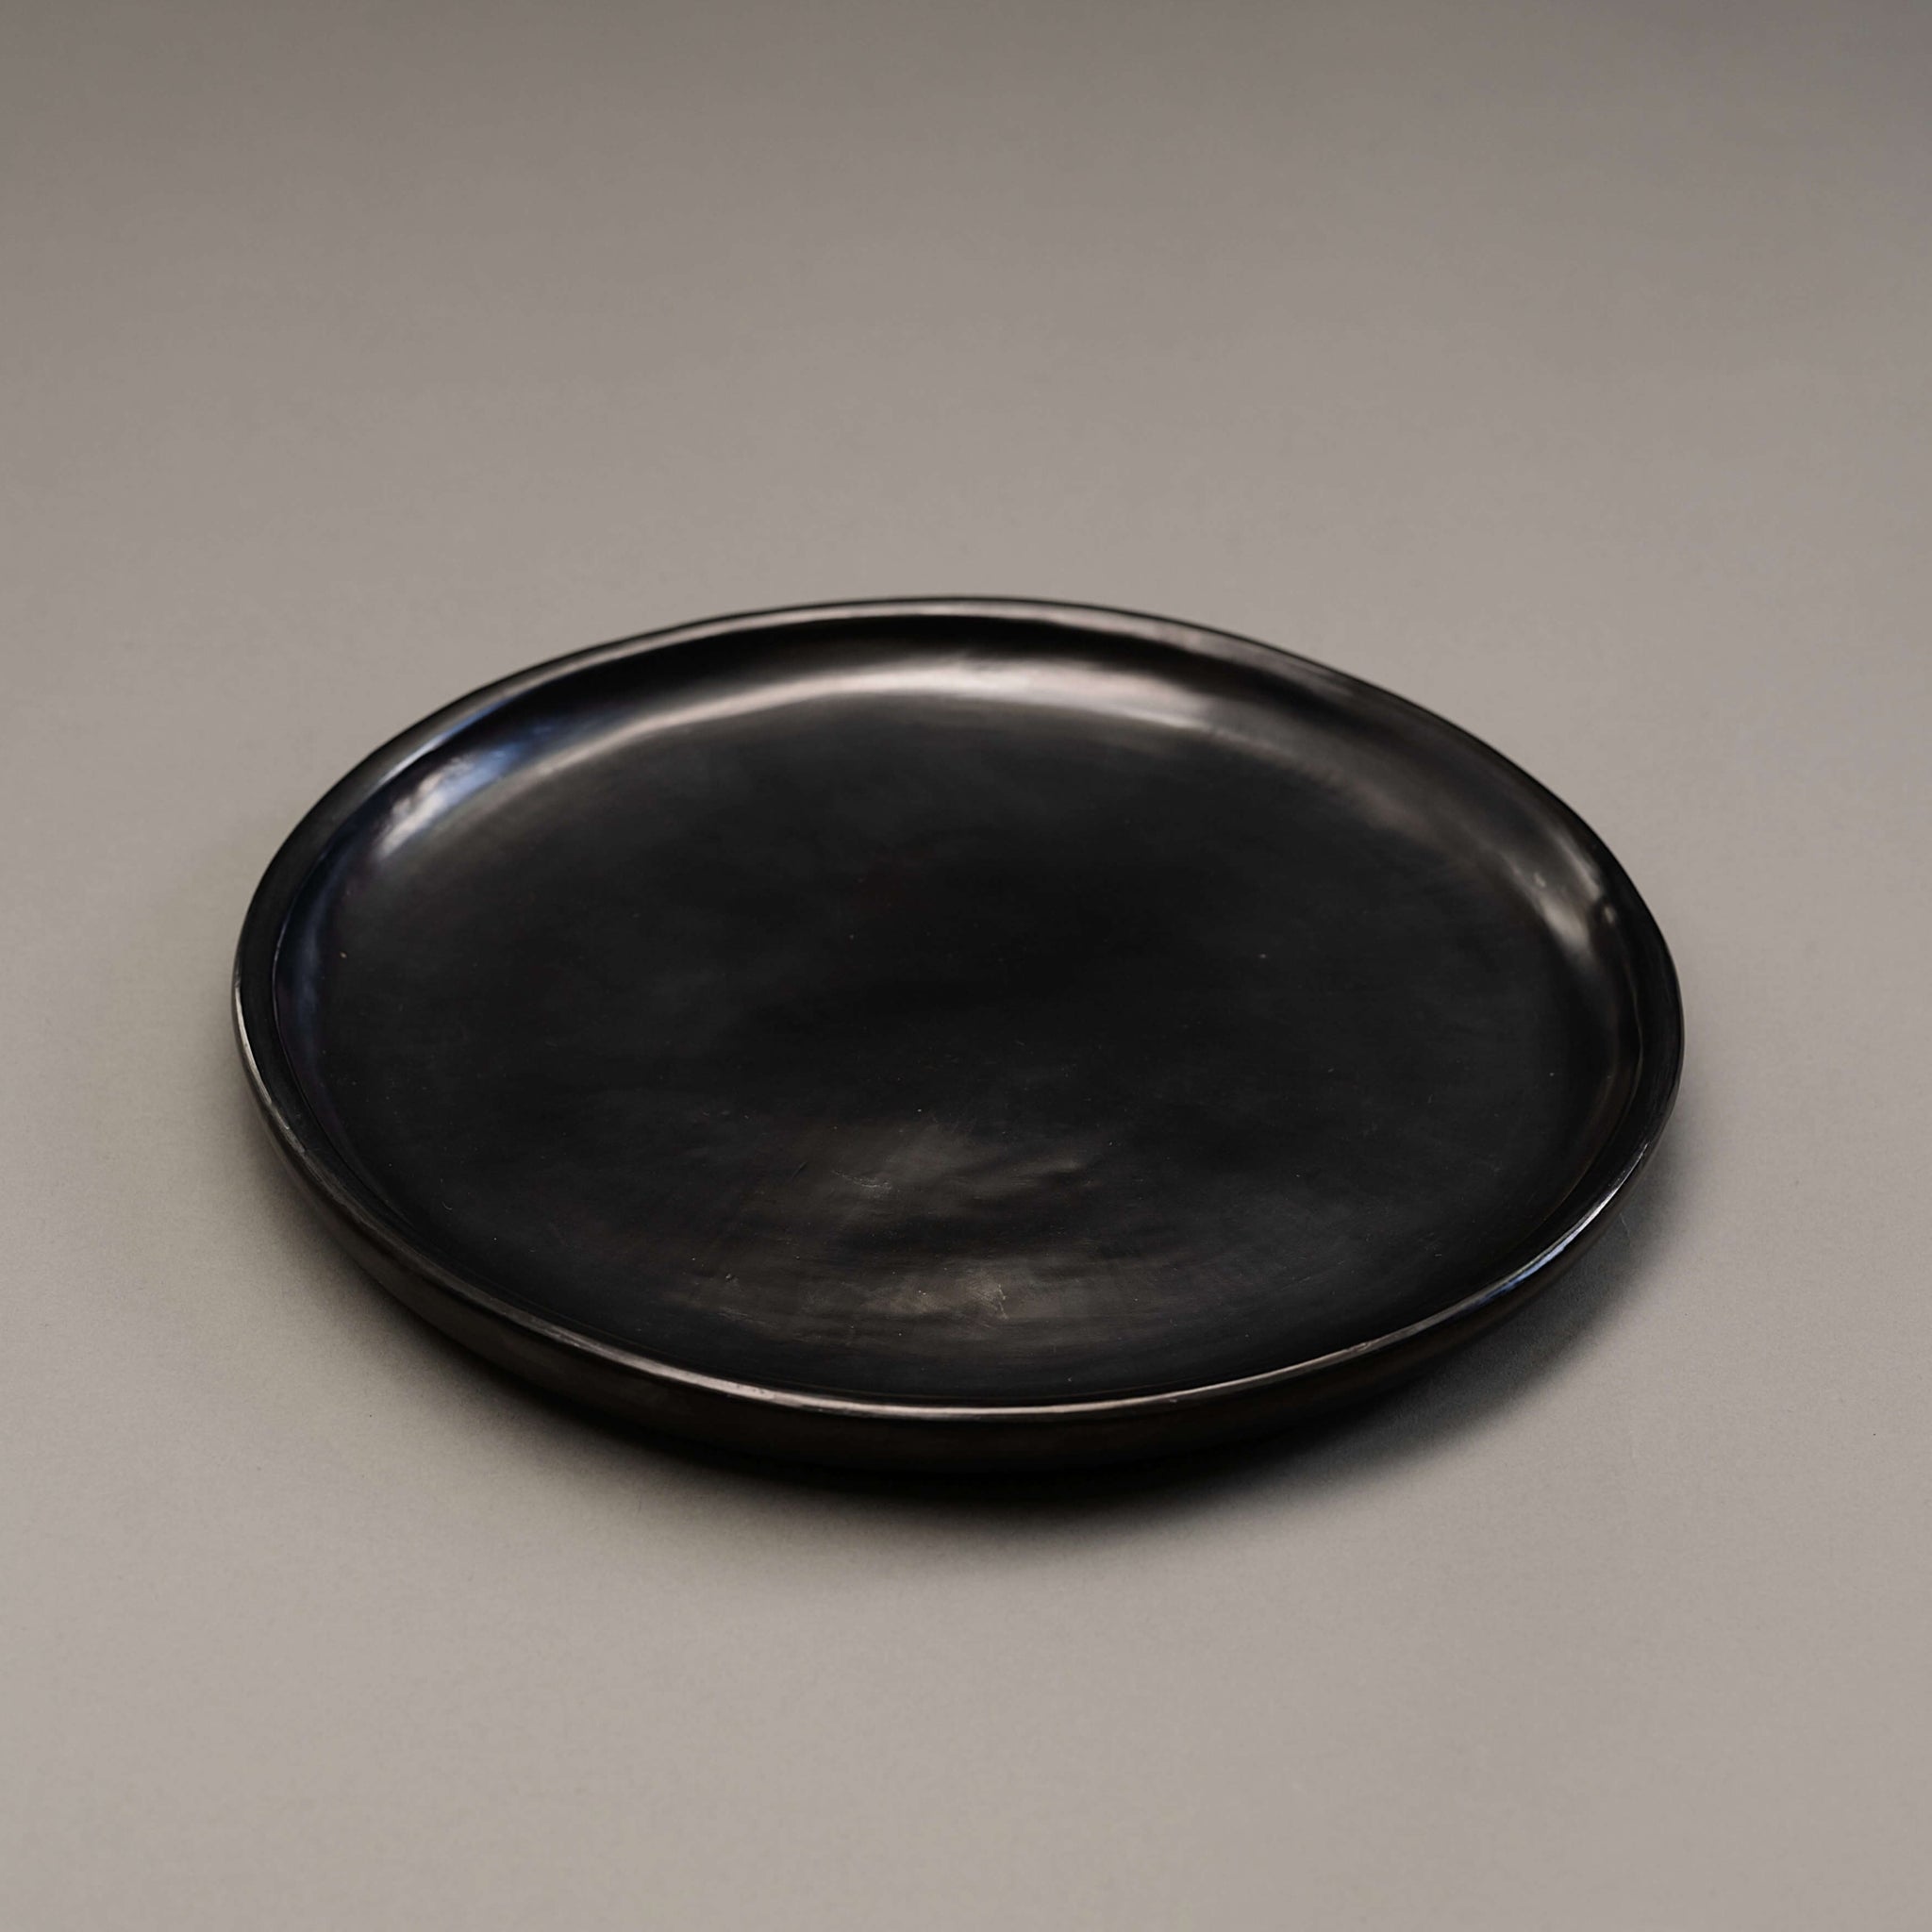 A side view of a black clay plate made in Oaxaca.